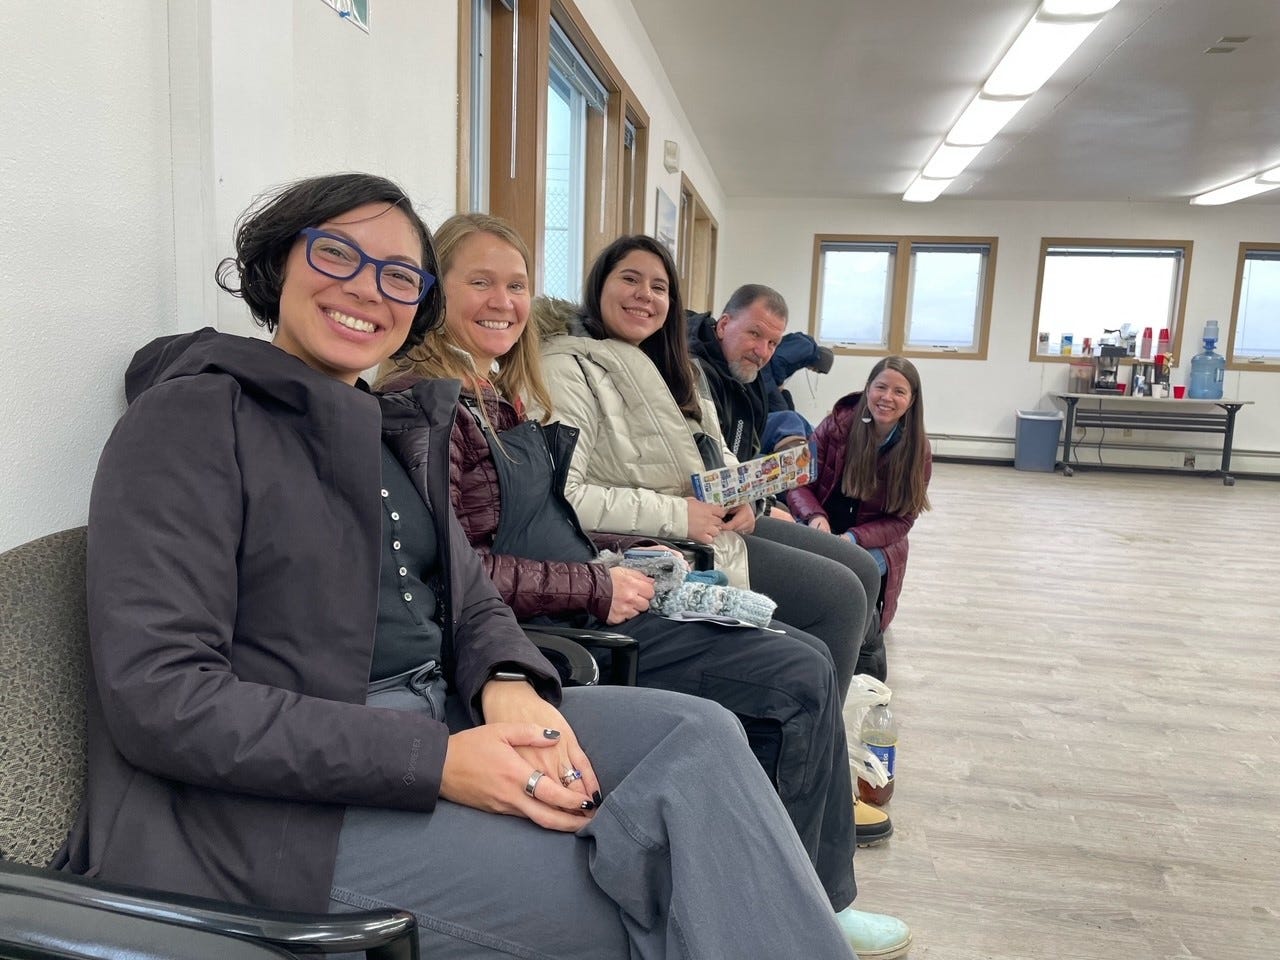 Image of Trust and Friends representatives waiting in a small airport waiting room